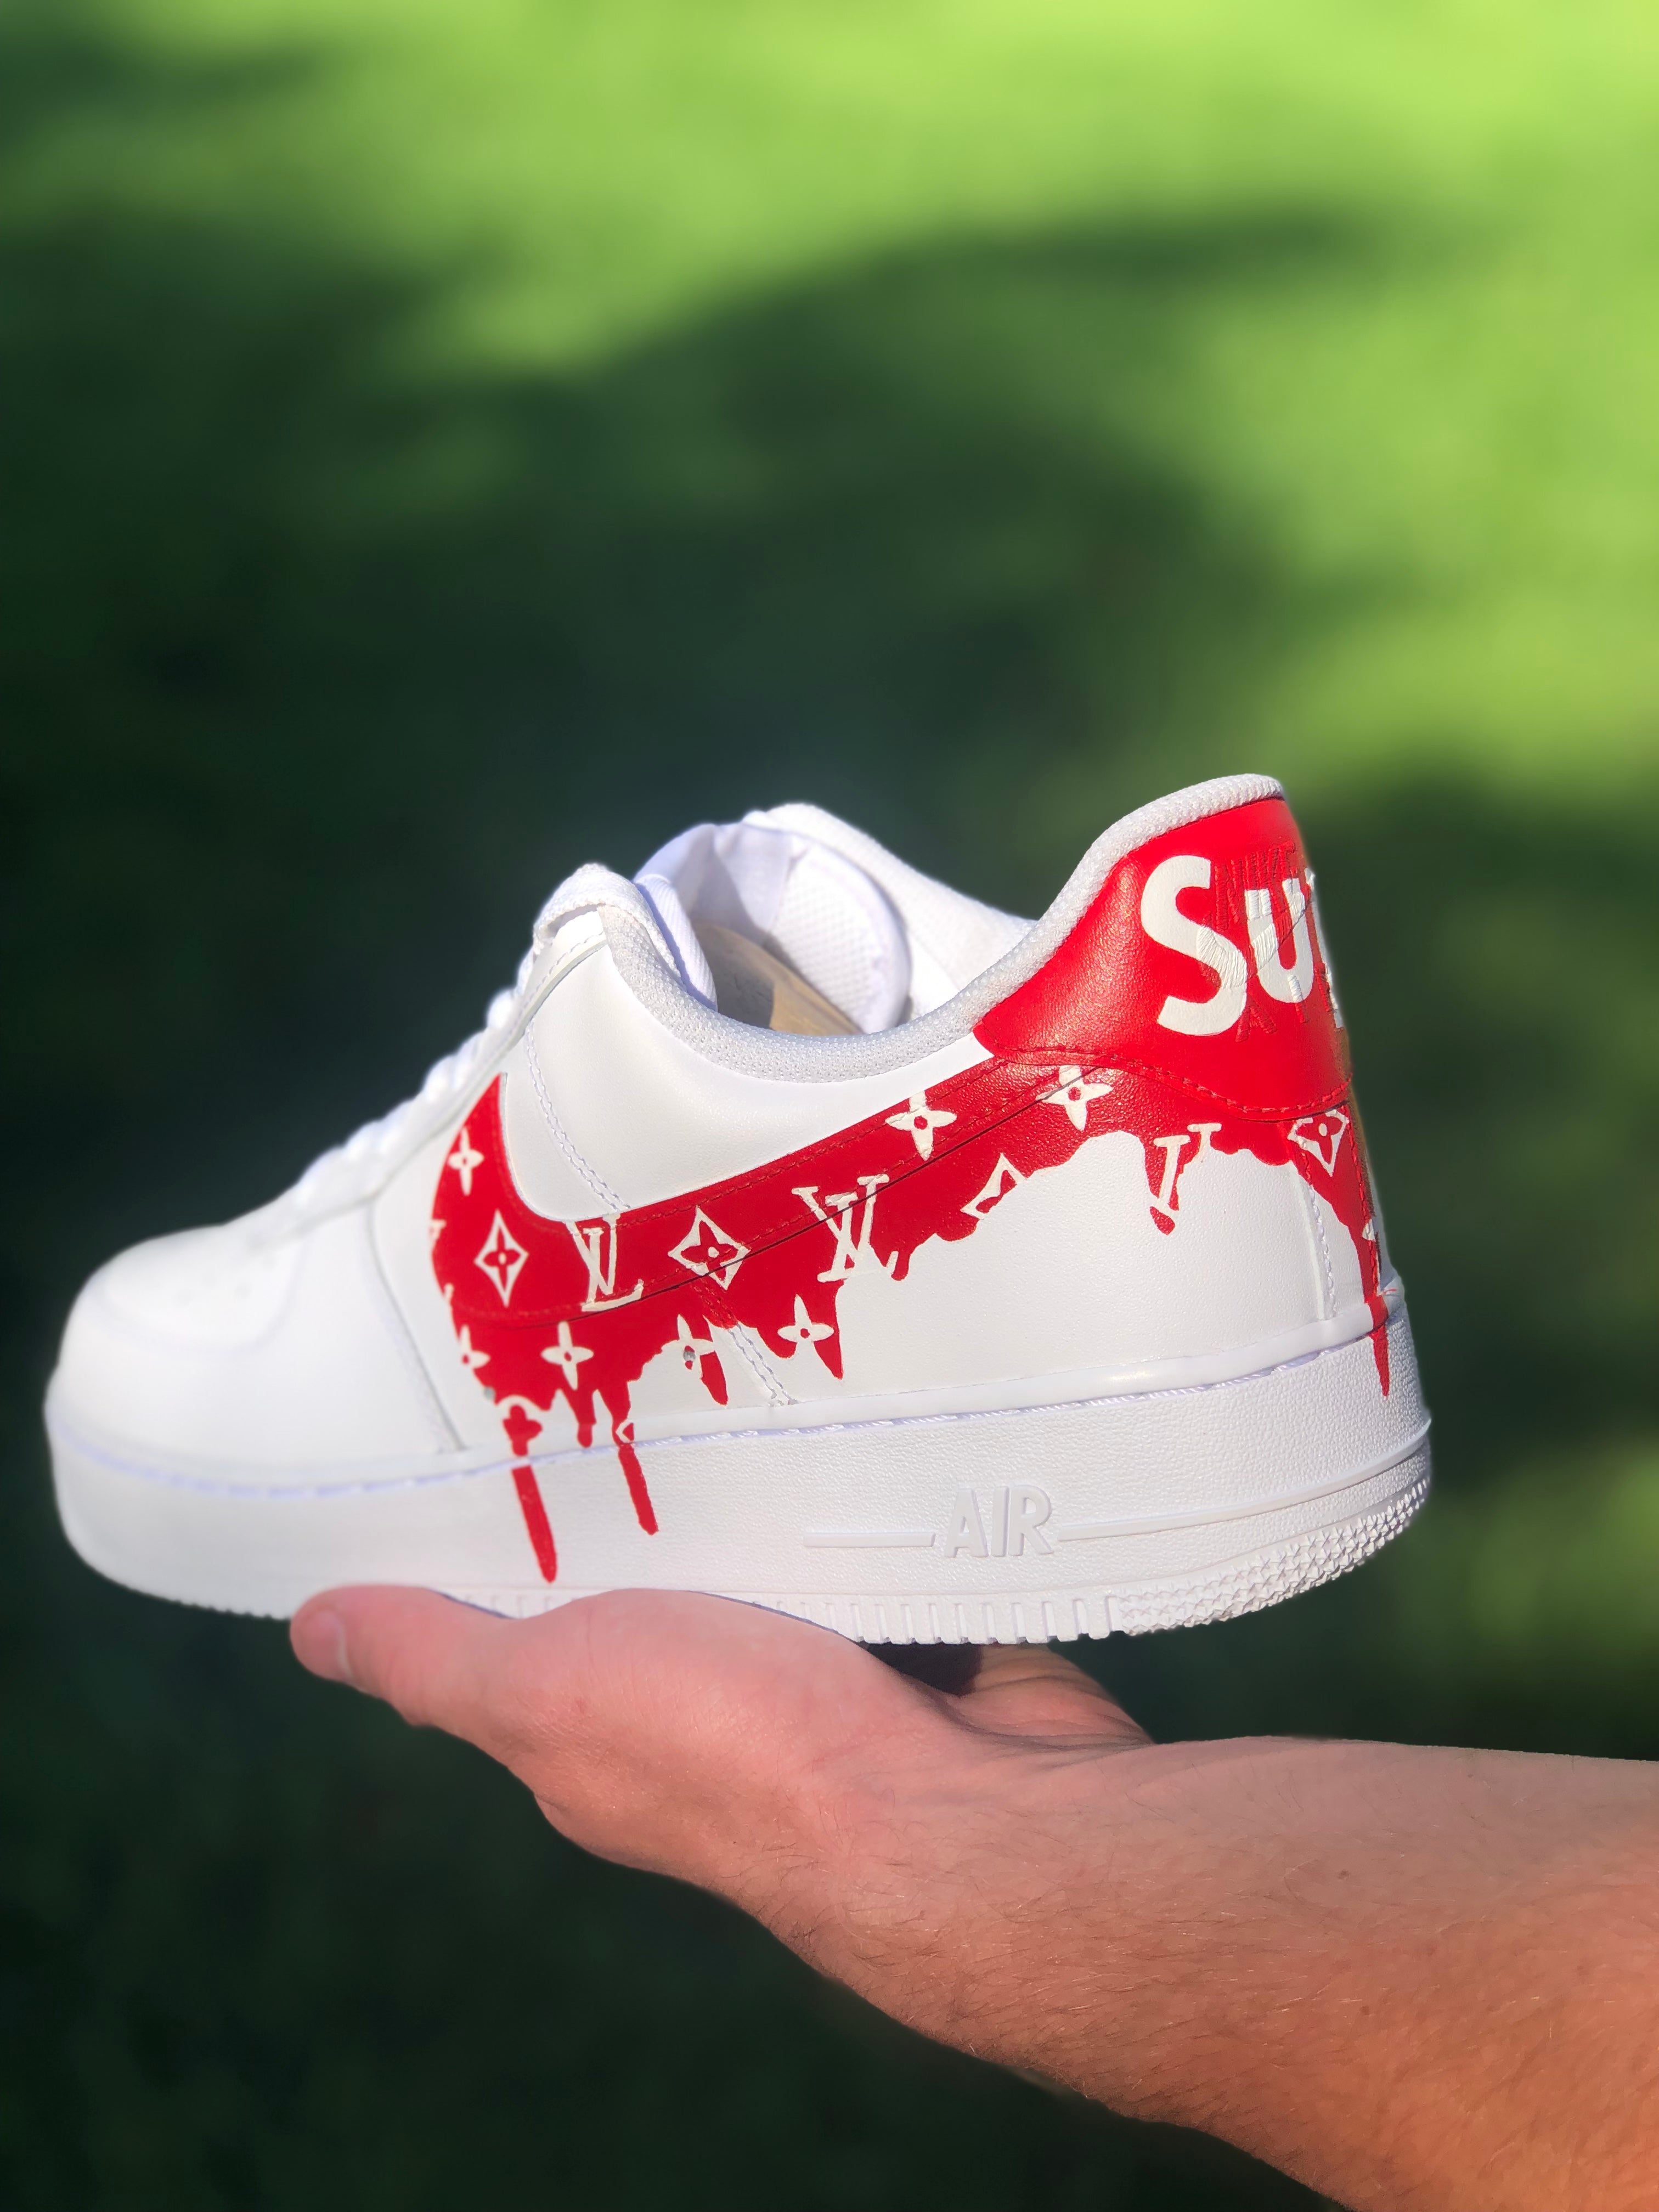 New custom AF1 by shop artist @grantmahl3r stop by for the Black Friday  deal!!! #shop23 #fire #louisvuitton #custom #paint #supreme #red…